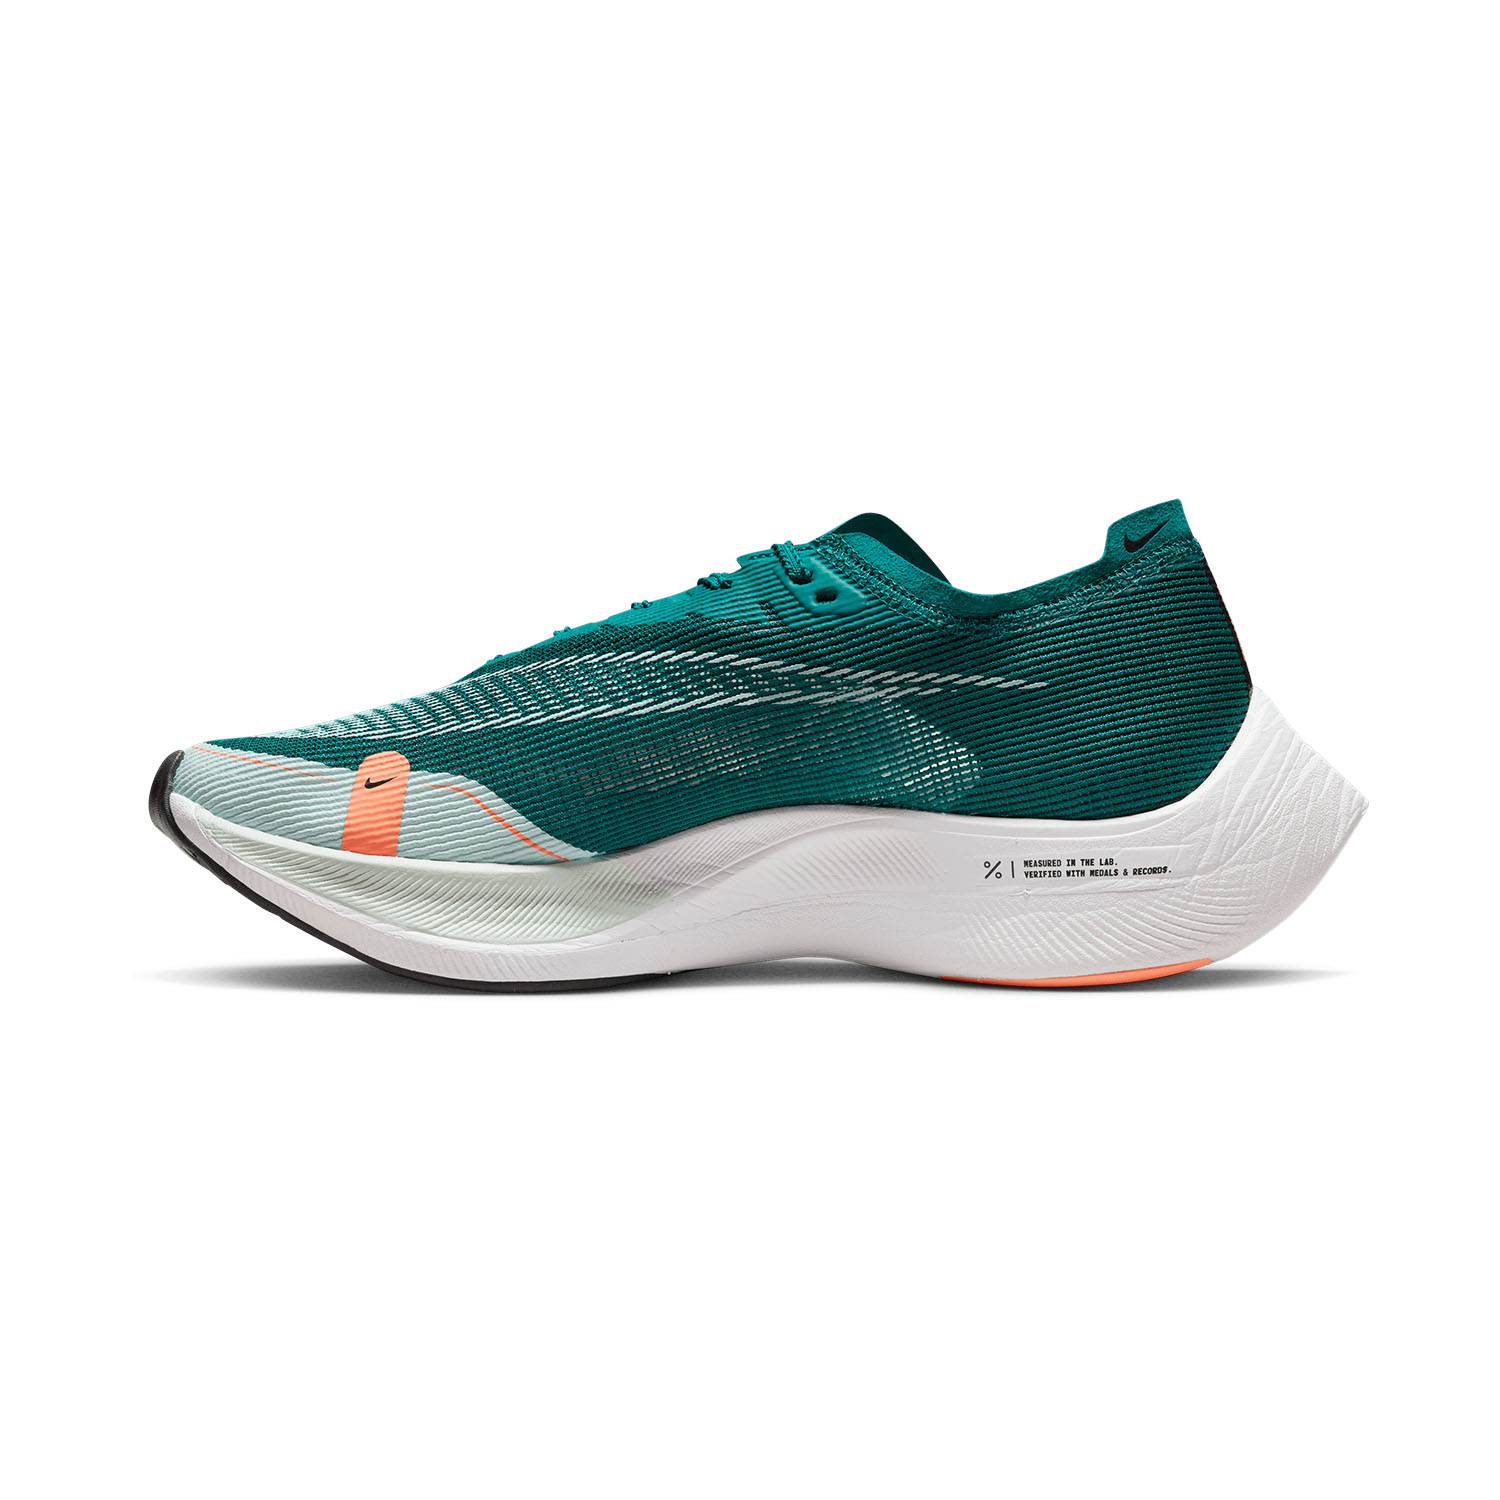 Nike ZoomX Vaporfly Next% 2 - Bright Spruce/Barely Green/White